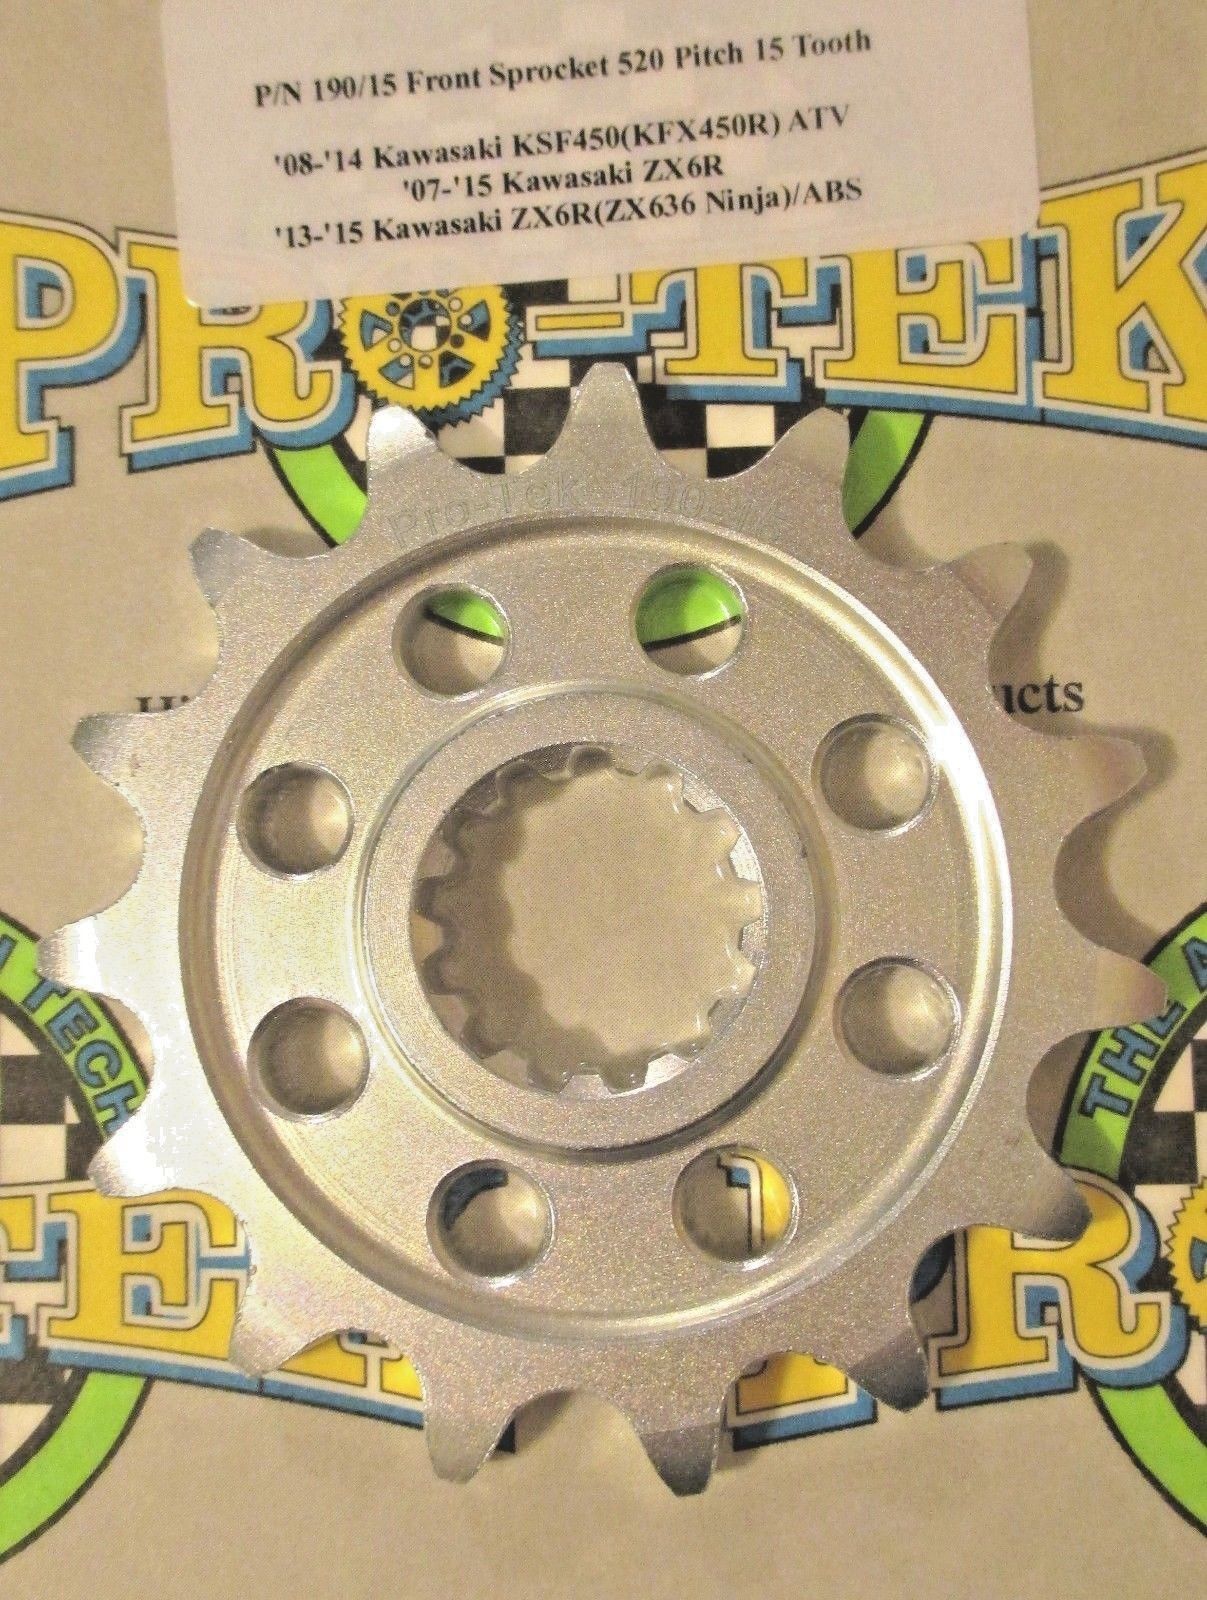 Primary image for Kawasaki Front Sprocket 520 Pitch 14T 15T 16T 2012 2013 2014 KSF450 KFX450R